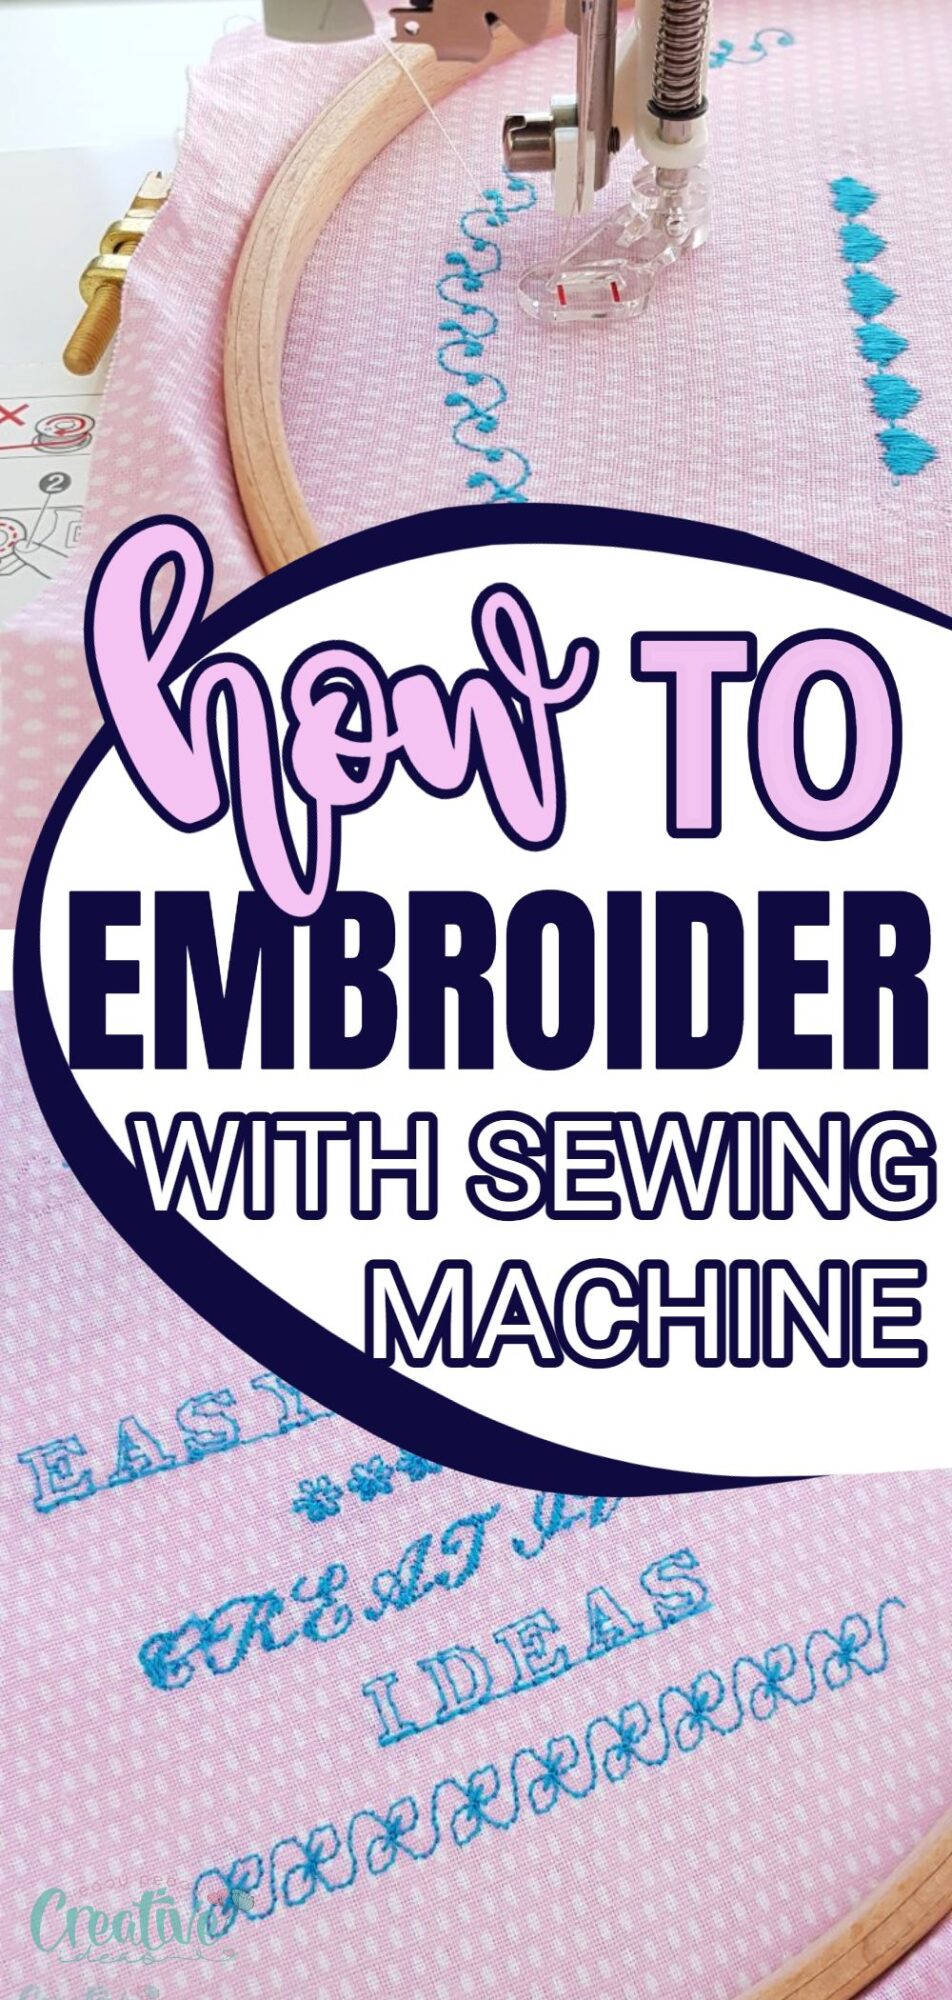 Learn how to embroider with a sewing machine! This guide covers all the essentials. Add personality to your clothes, accessories, or home décor. Show your loved ones you care with heartfelt messages.